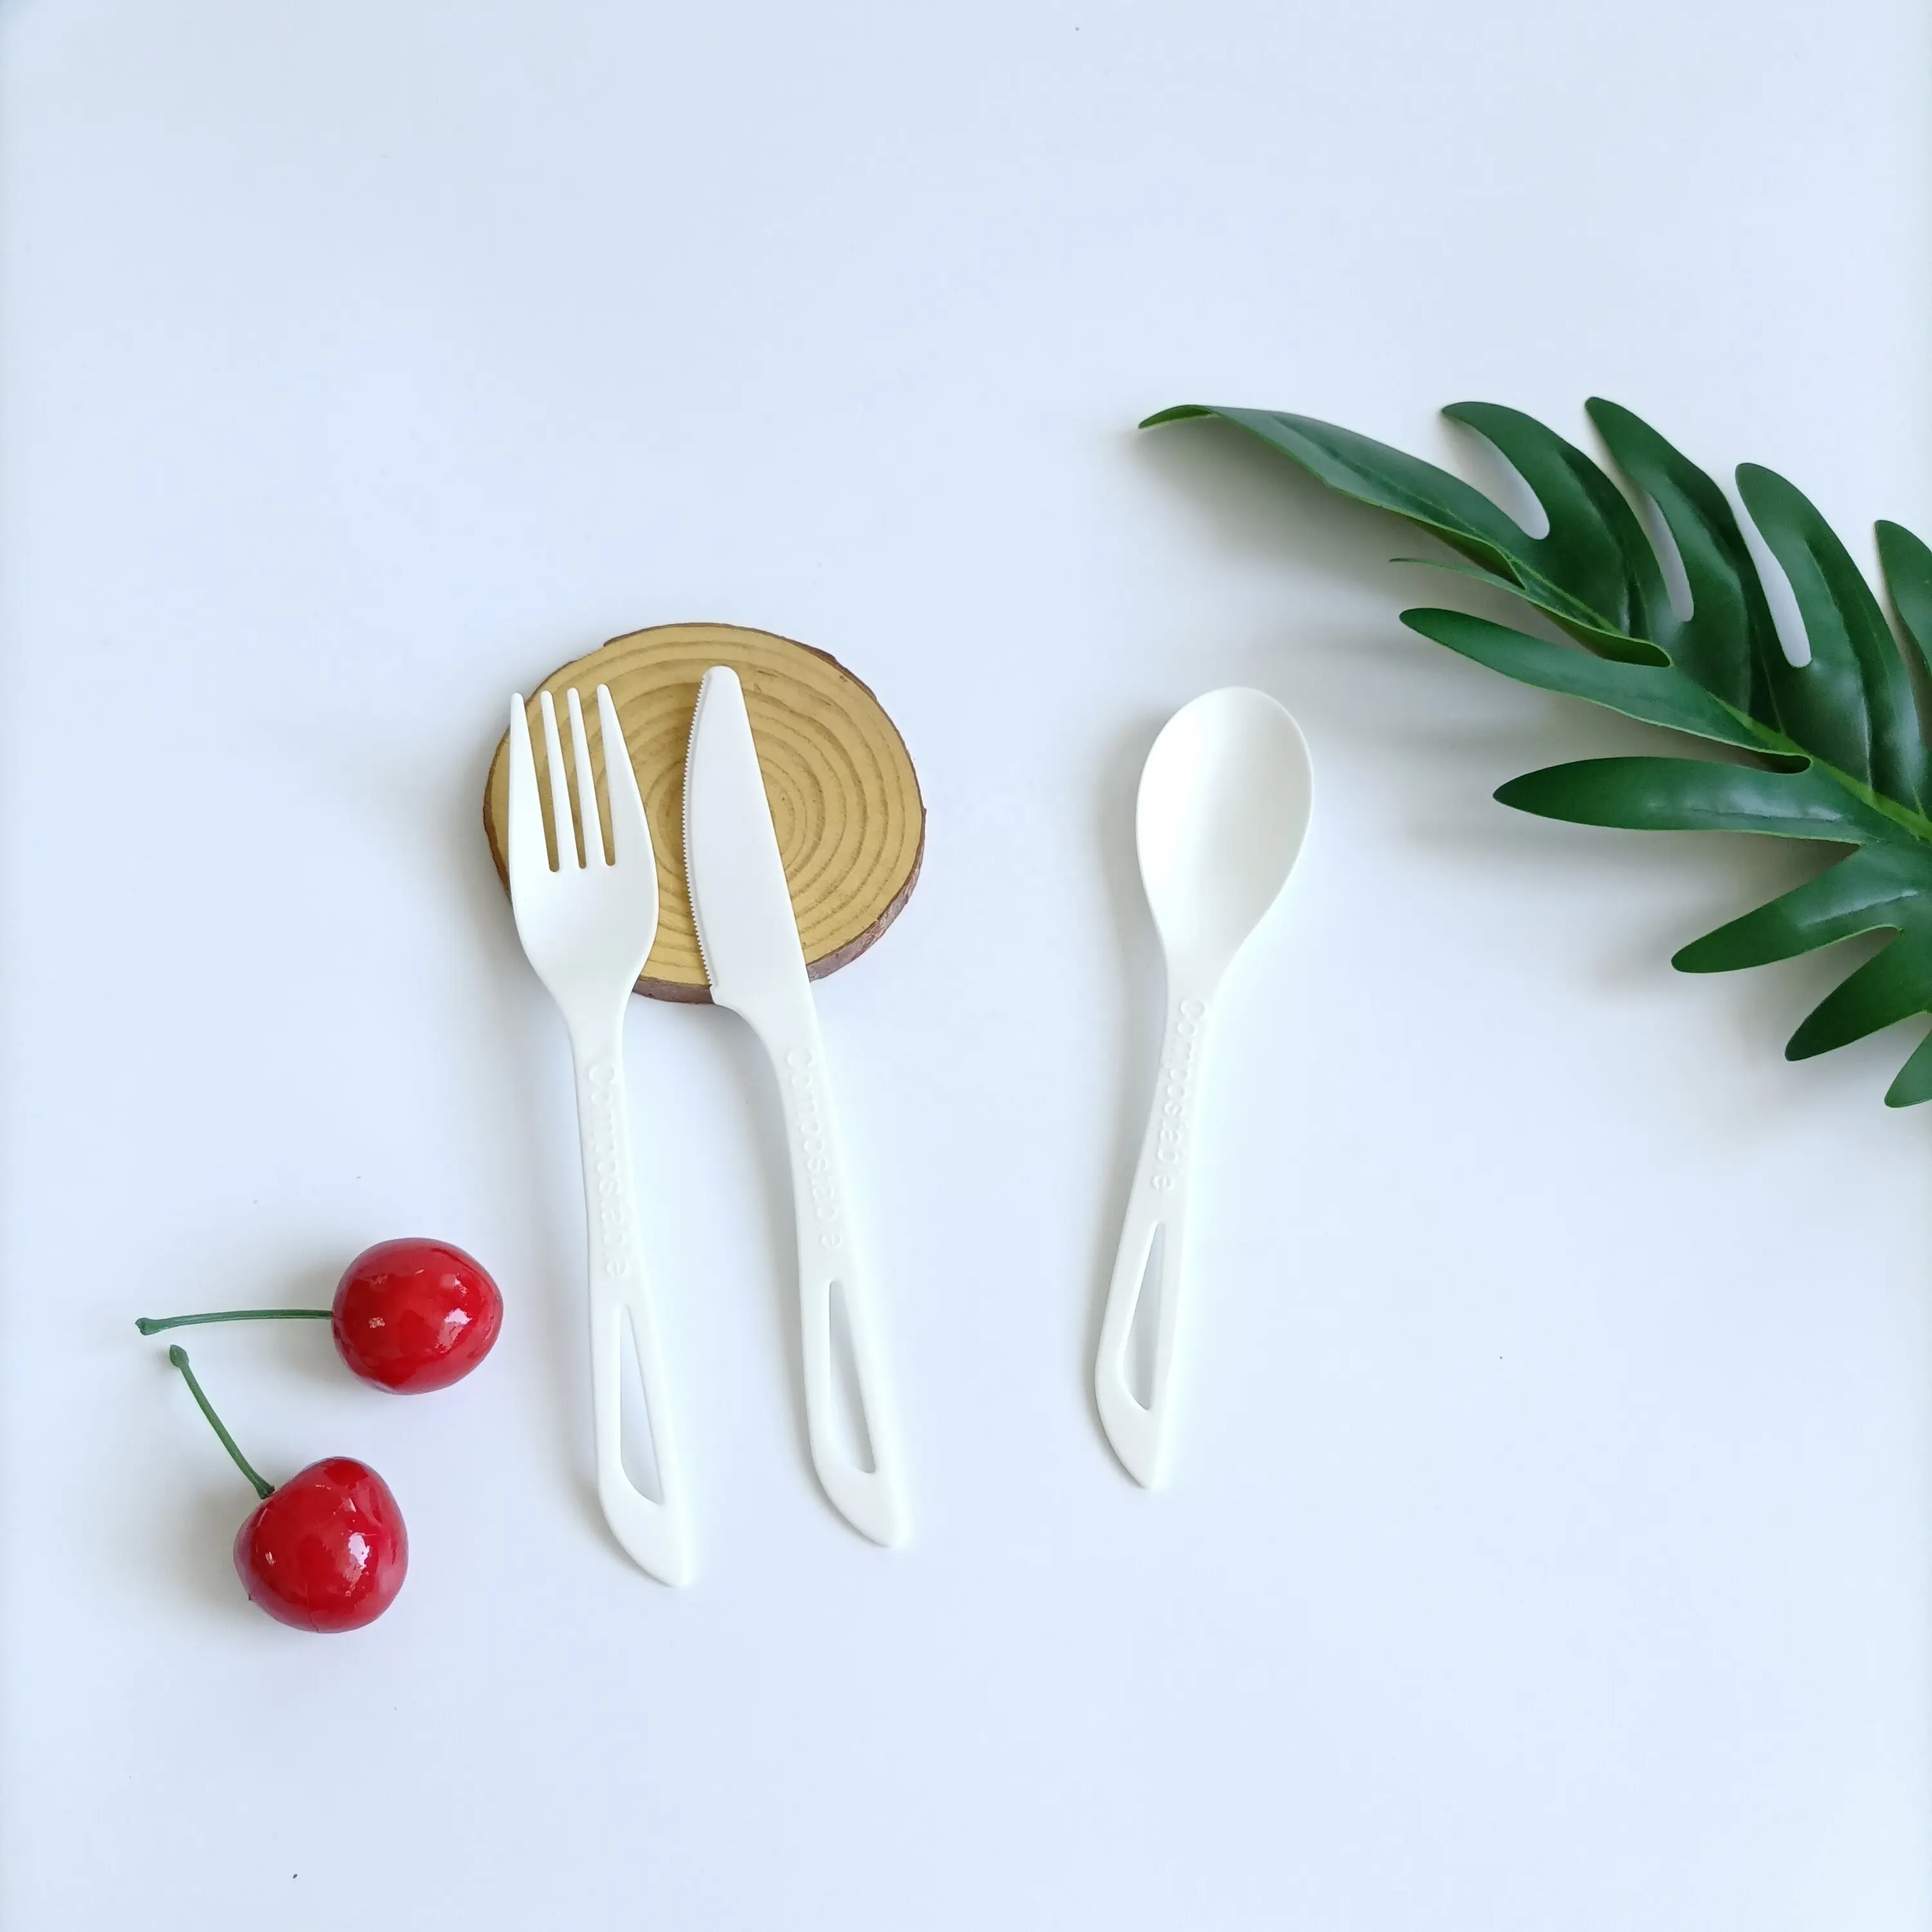 6 Inch Compostable Biodegradable Disposable Cutlery Set PLA Material Spoon Knife And Fork